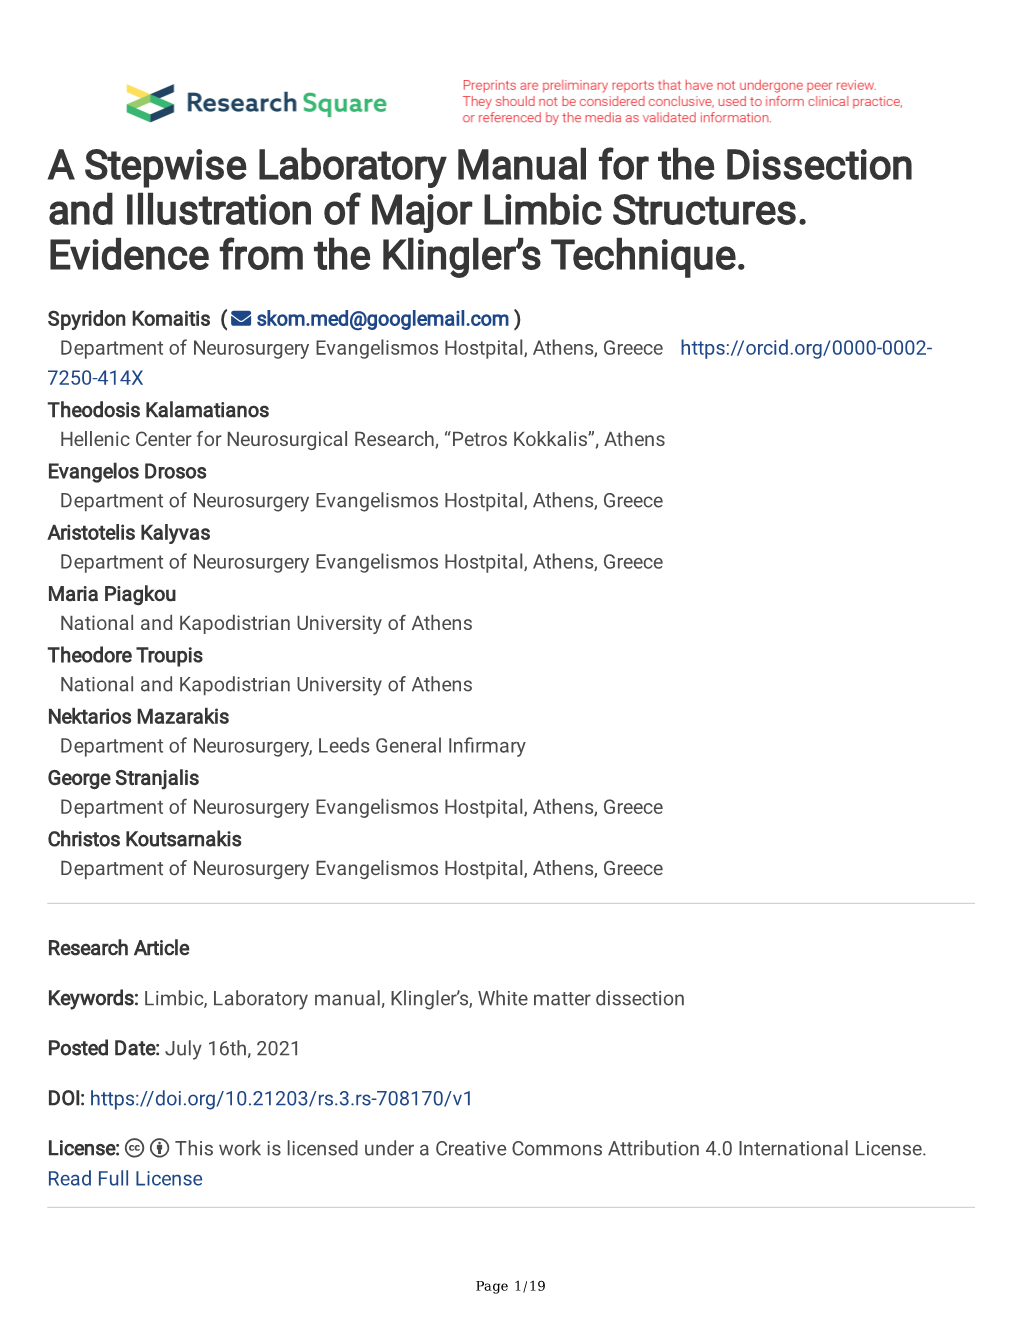 A Stepwise Laboratory Manual for the Dissection and Illustration of Major Limbic Structures